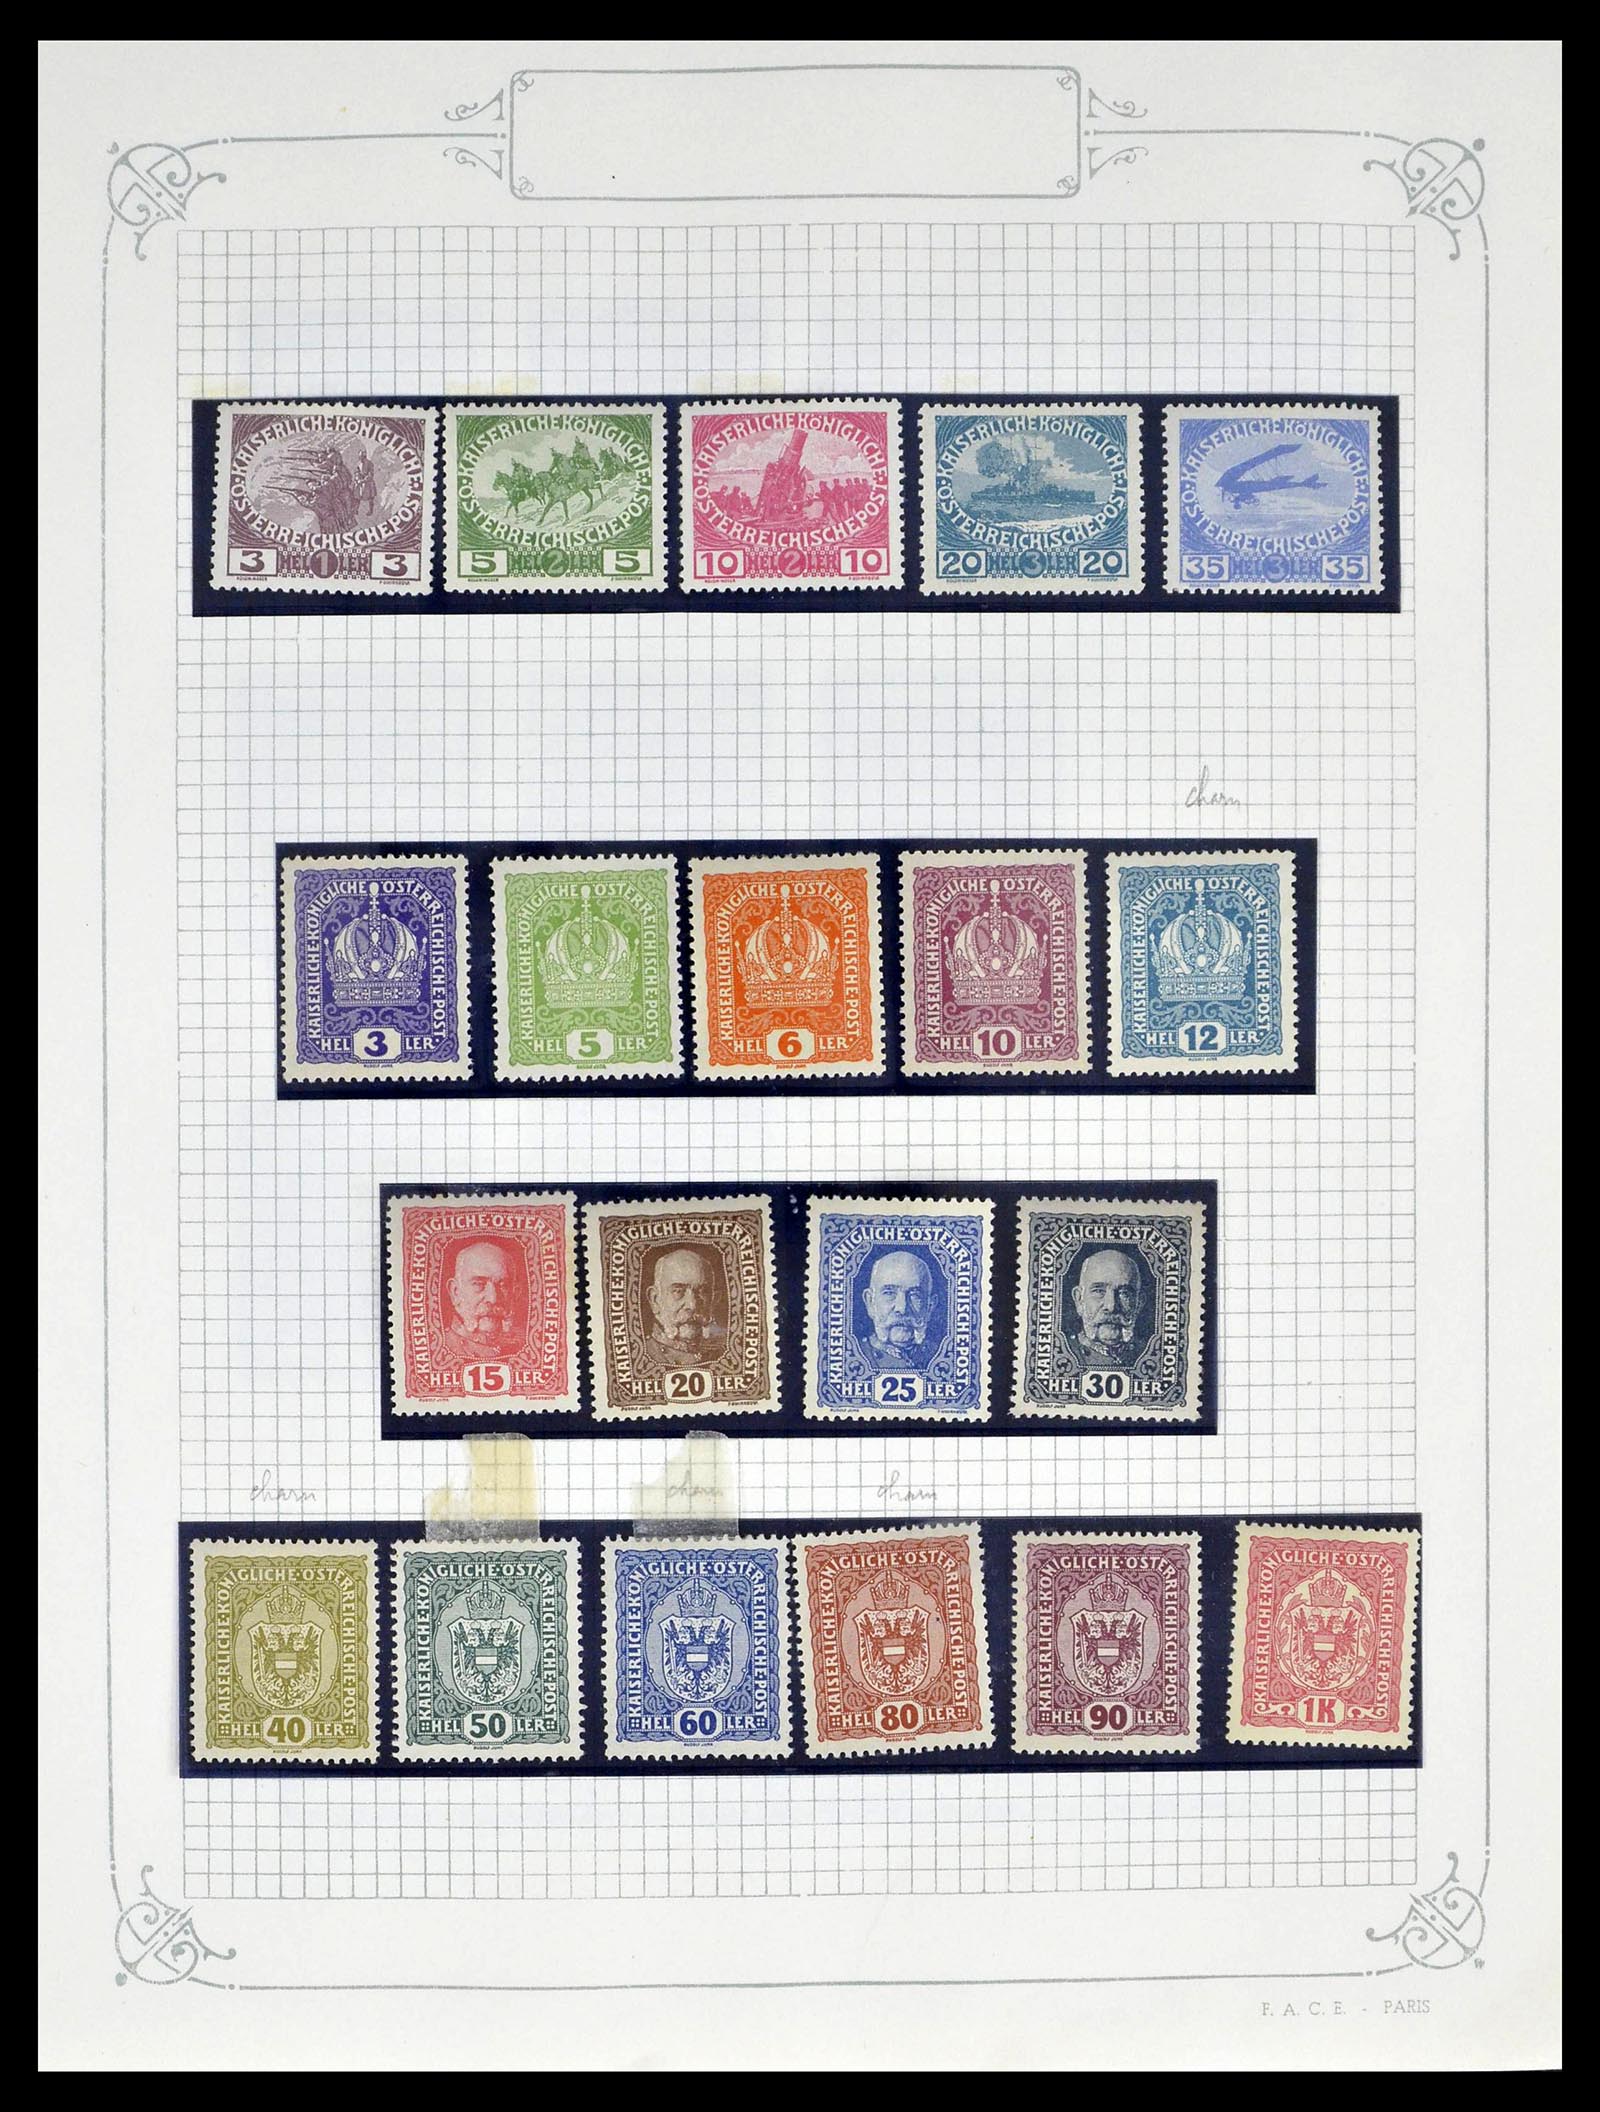 39276 0014 - Stamp collection 39276 Austria and territories 1850-1979.